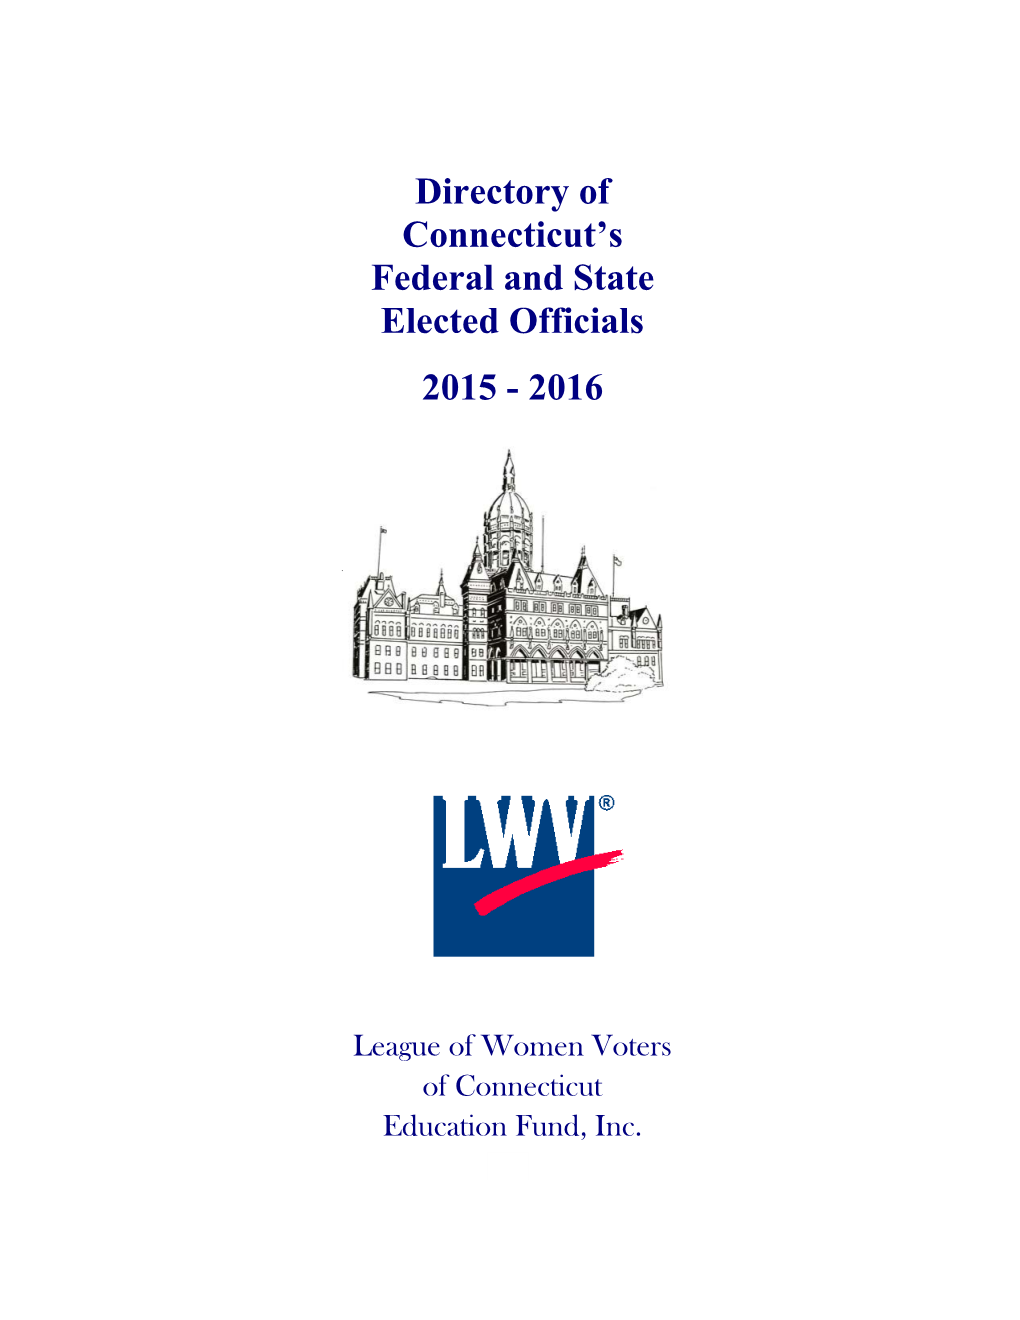 Directory of Connecticut’S Federal and State Elected Officials 2015 - 2016